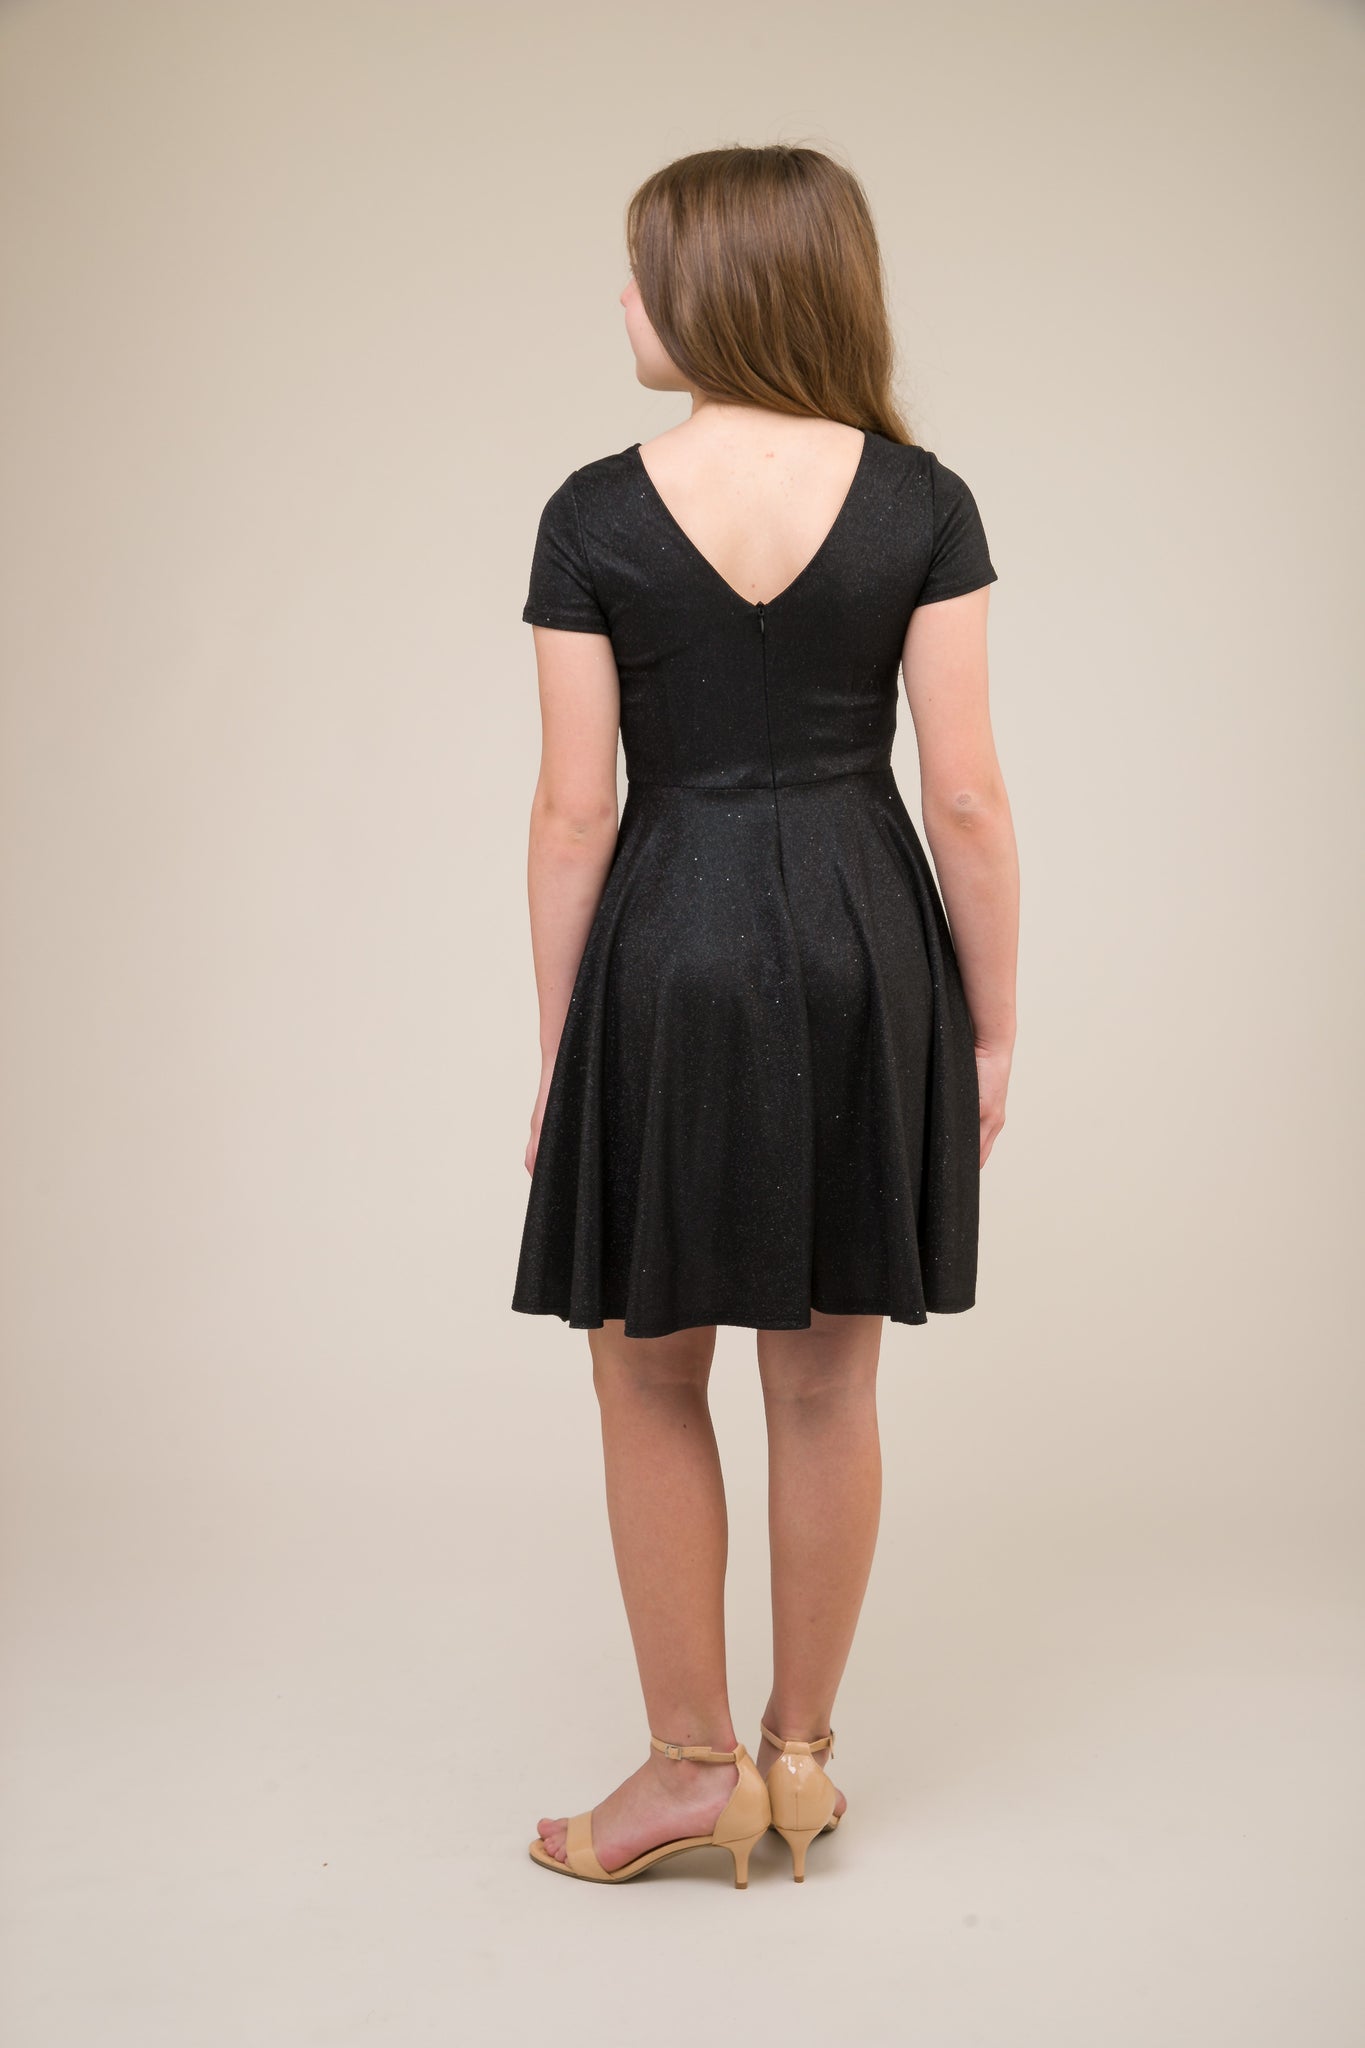 This is an all over black stretch glitter dress made with soft lining. It's non-scratch fabric is a perfect dress that hits right above the knee and has a lower v-back detailing.